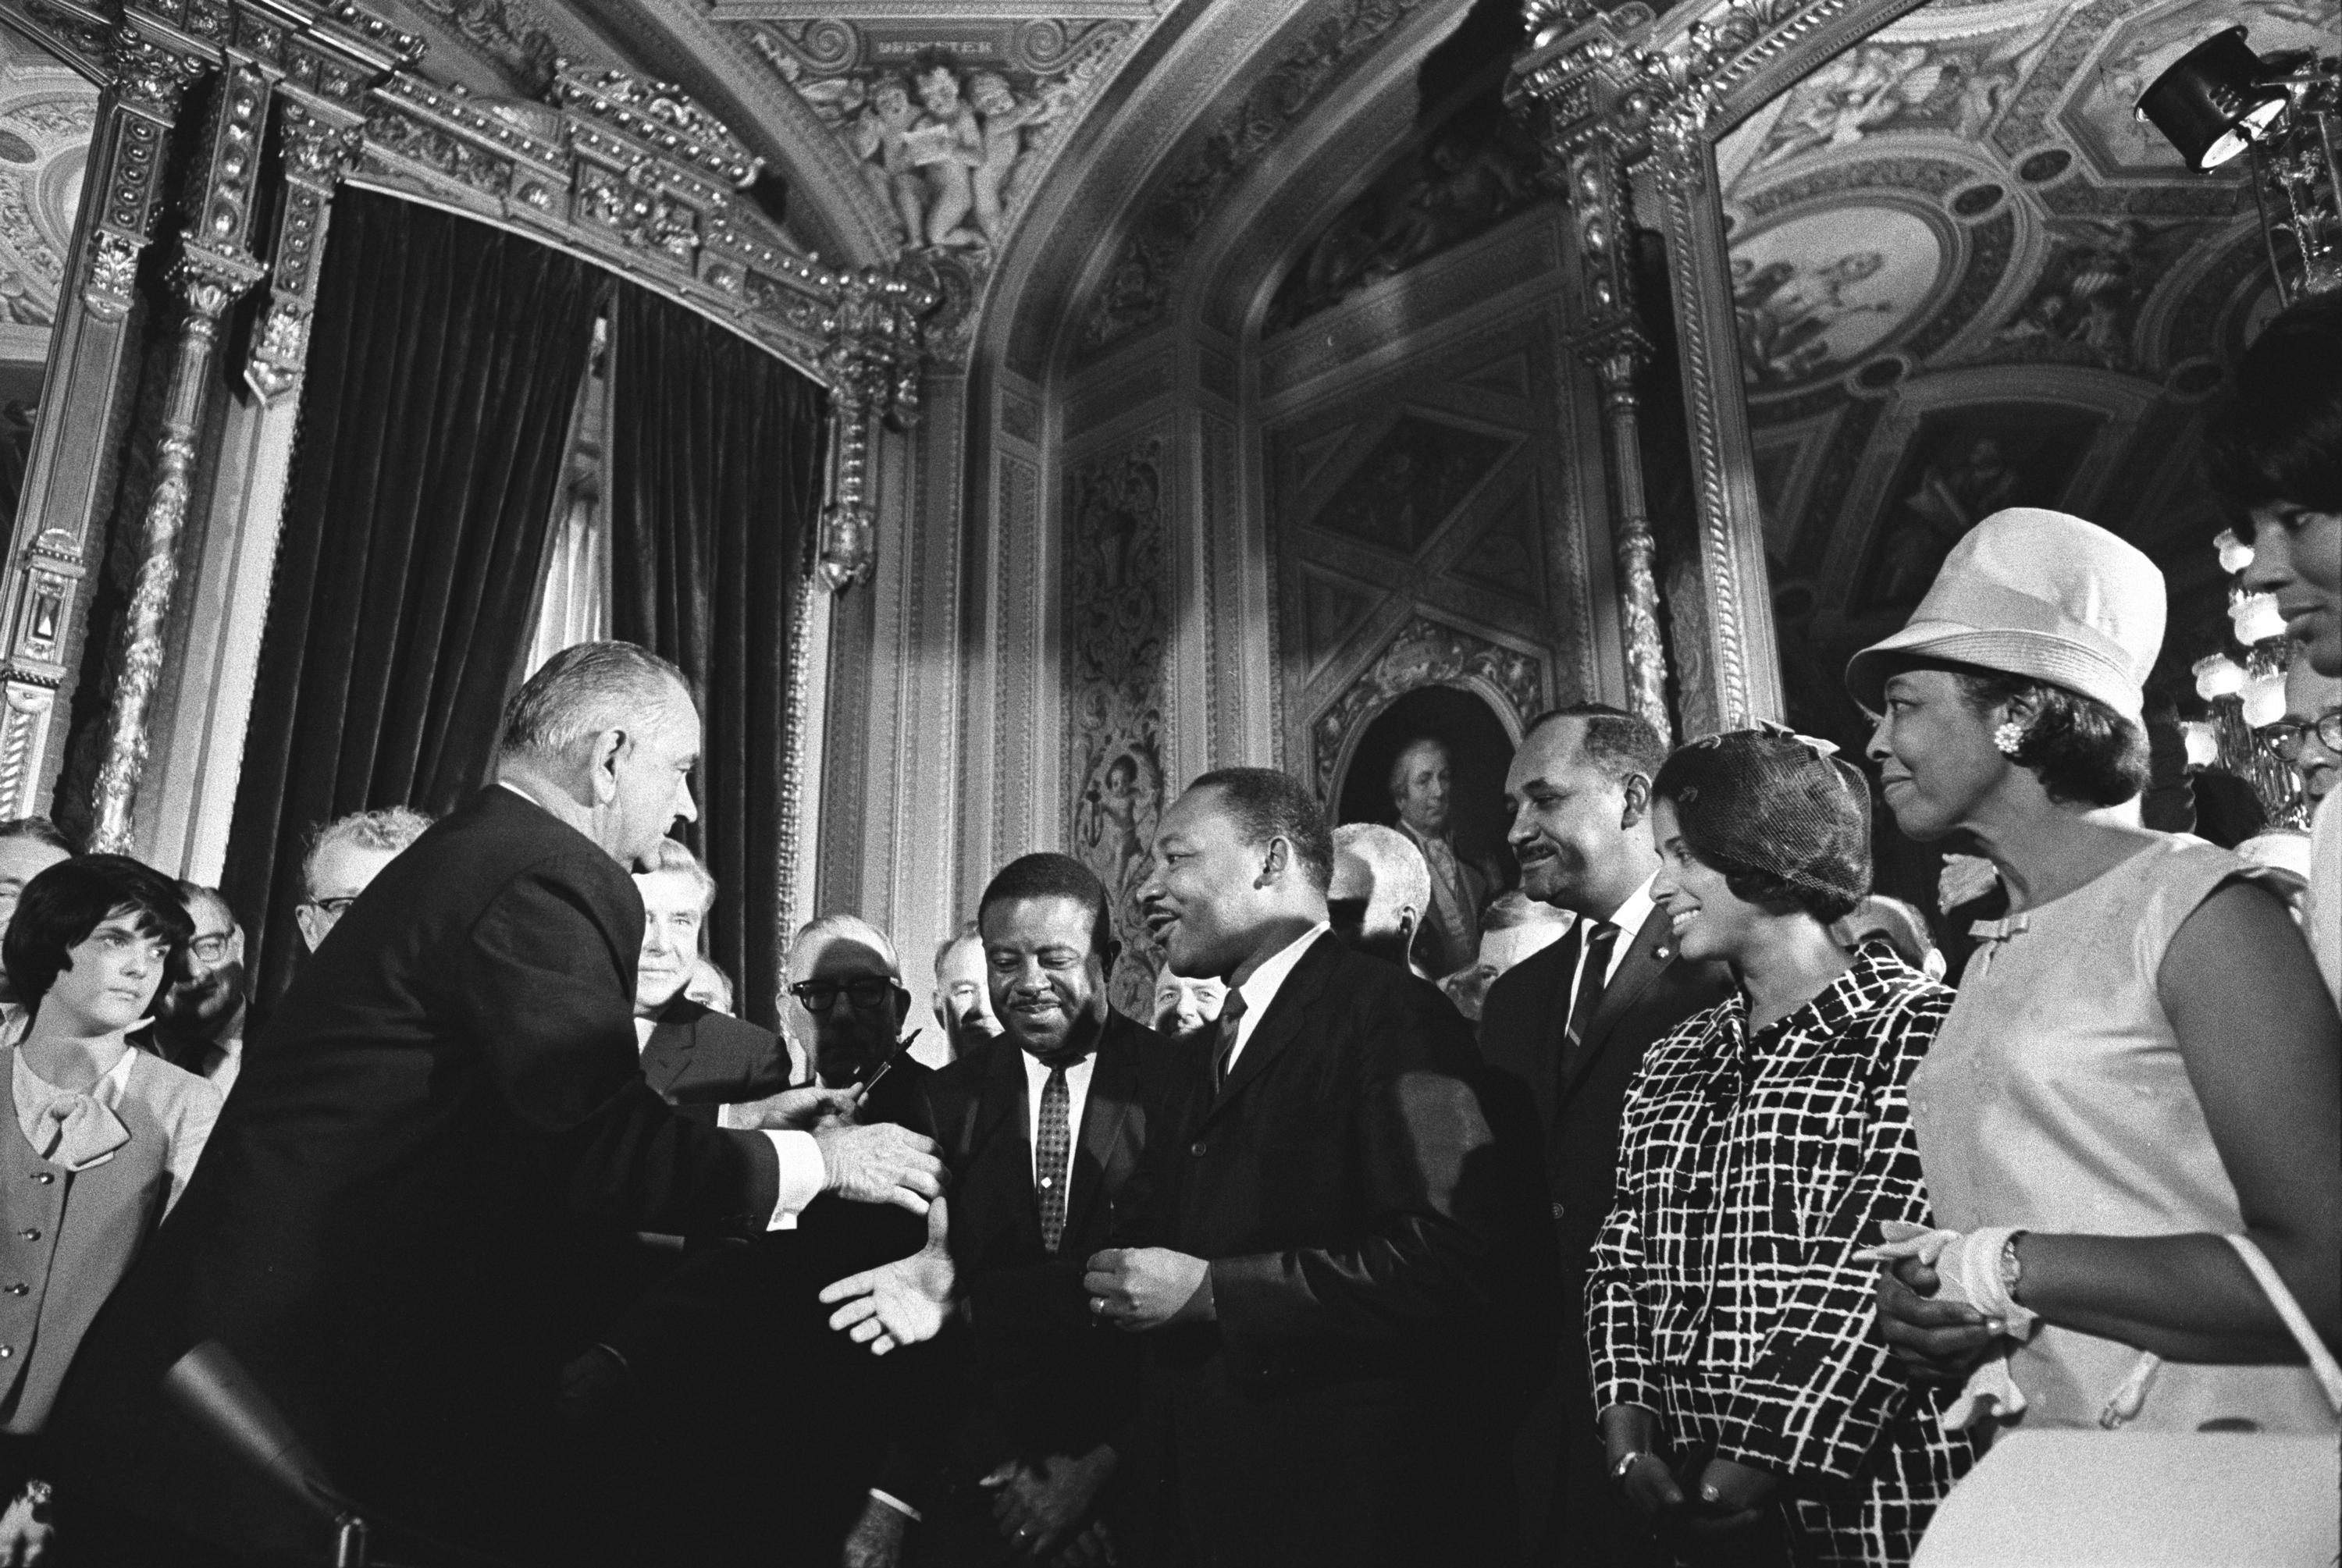 Lyndon Johnson and Martin Luther King, Jr. - Voting Rights Act.jpg